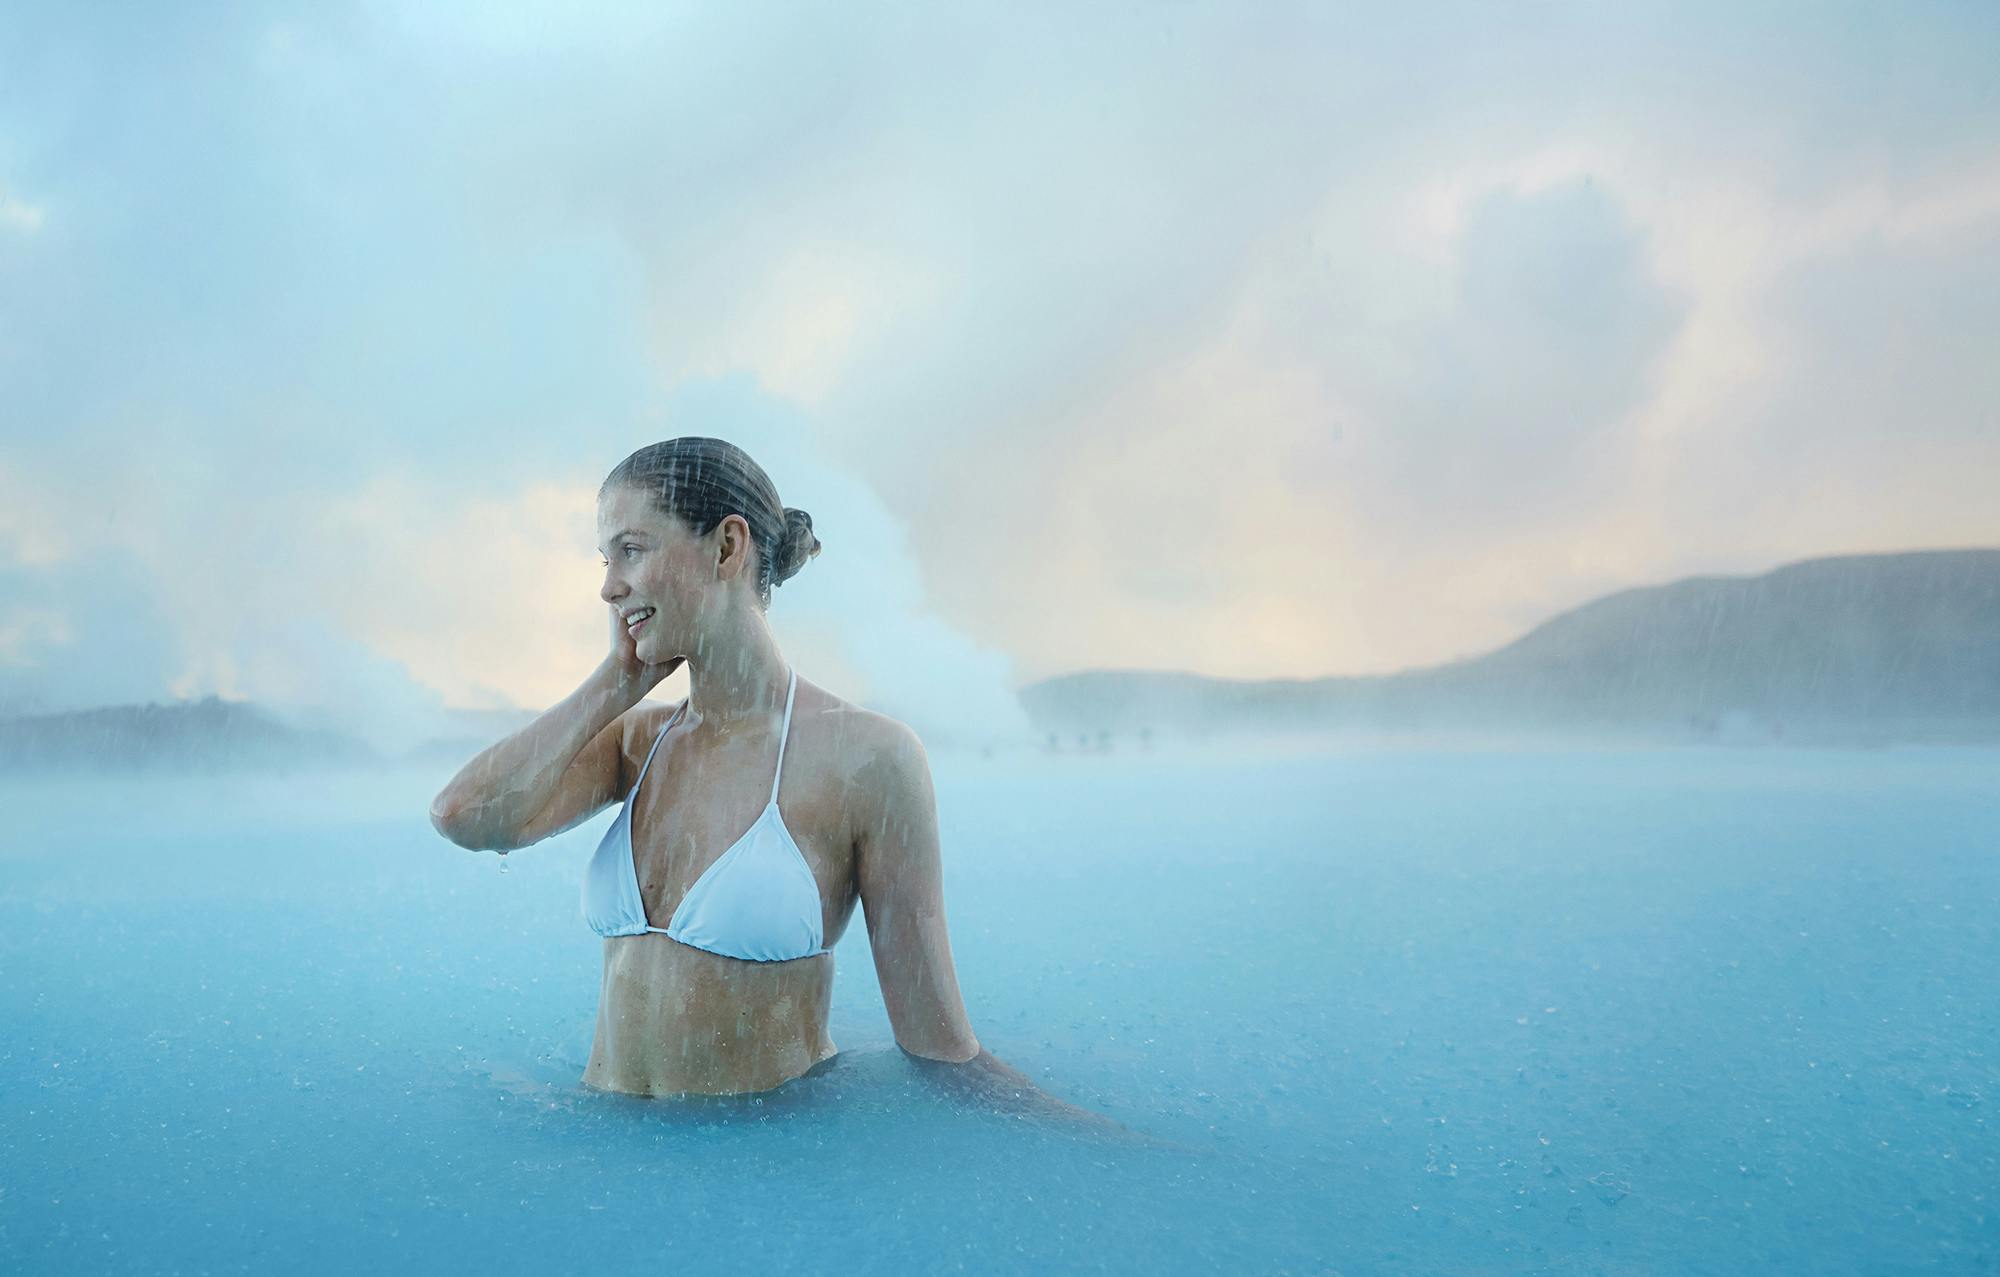 The Blue Lagoon Spa is a favourite among visitors and locals alike thanks to the healing properties of its silica mud and its soothing warm water.